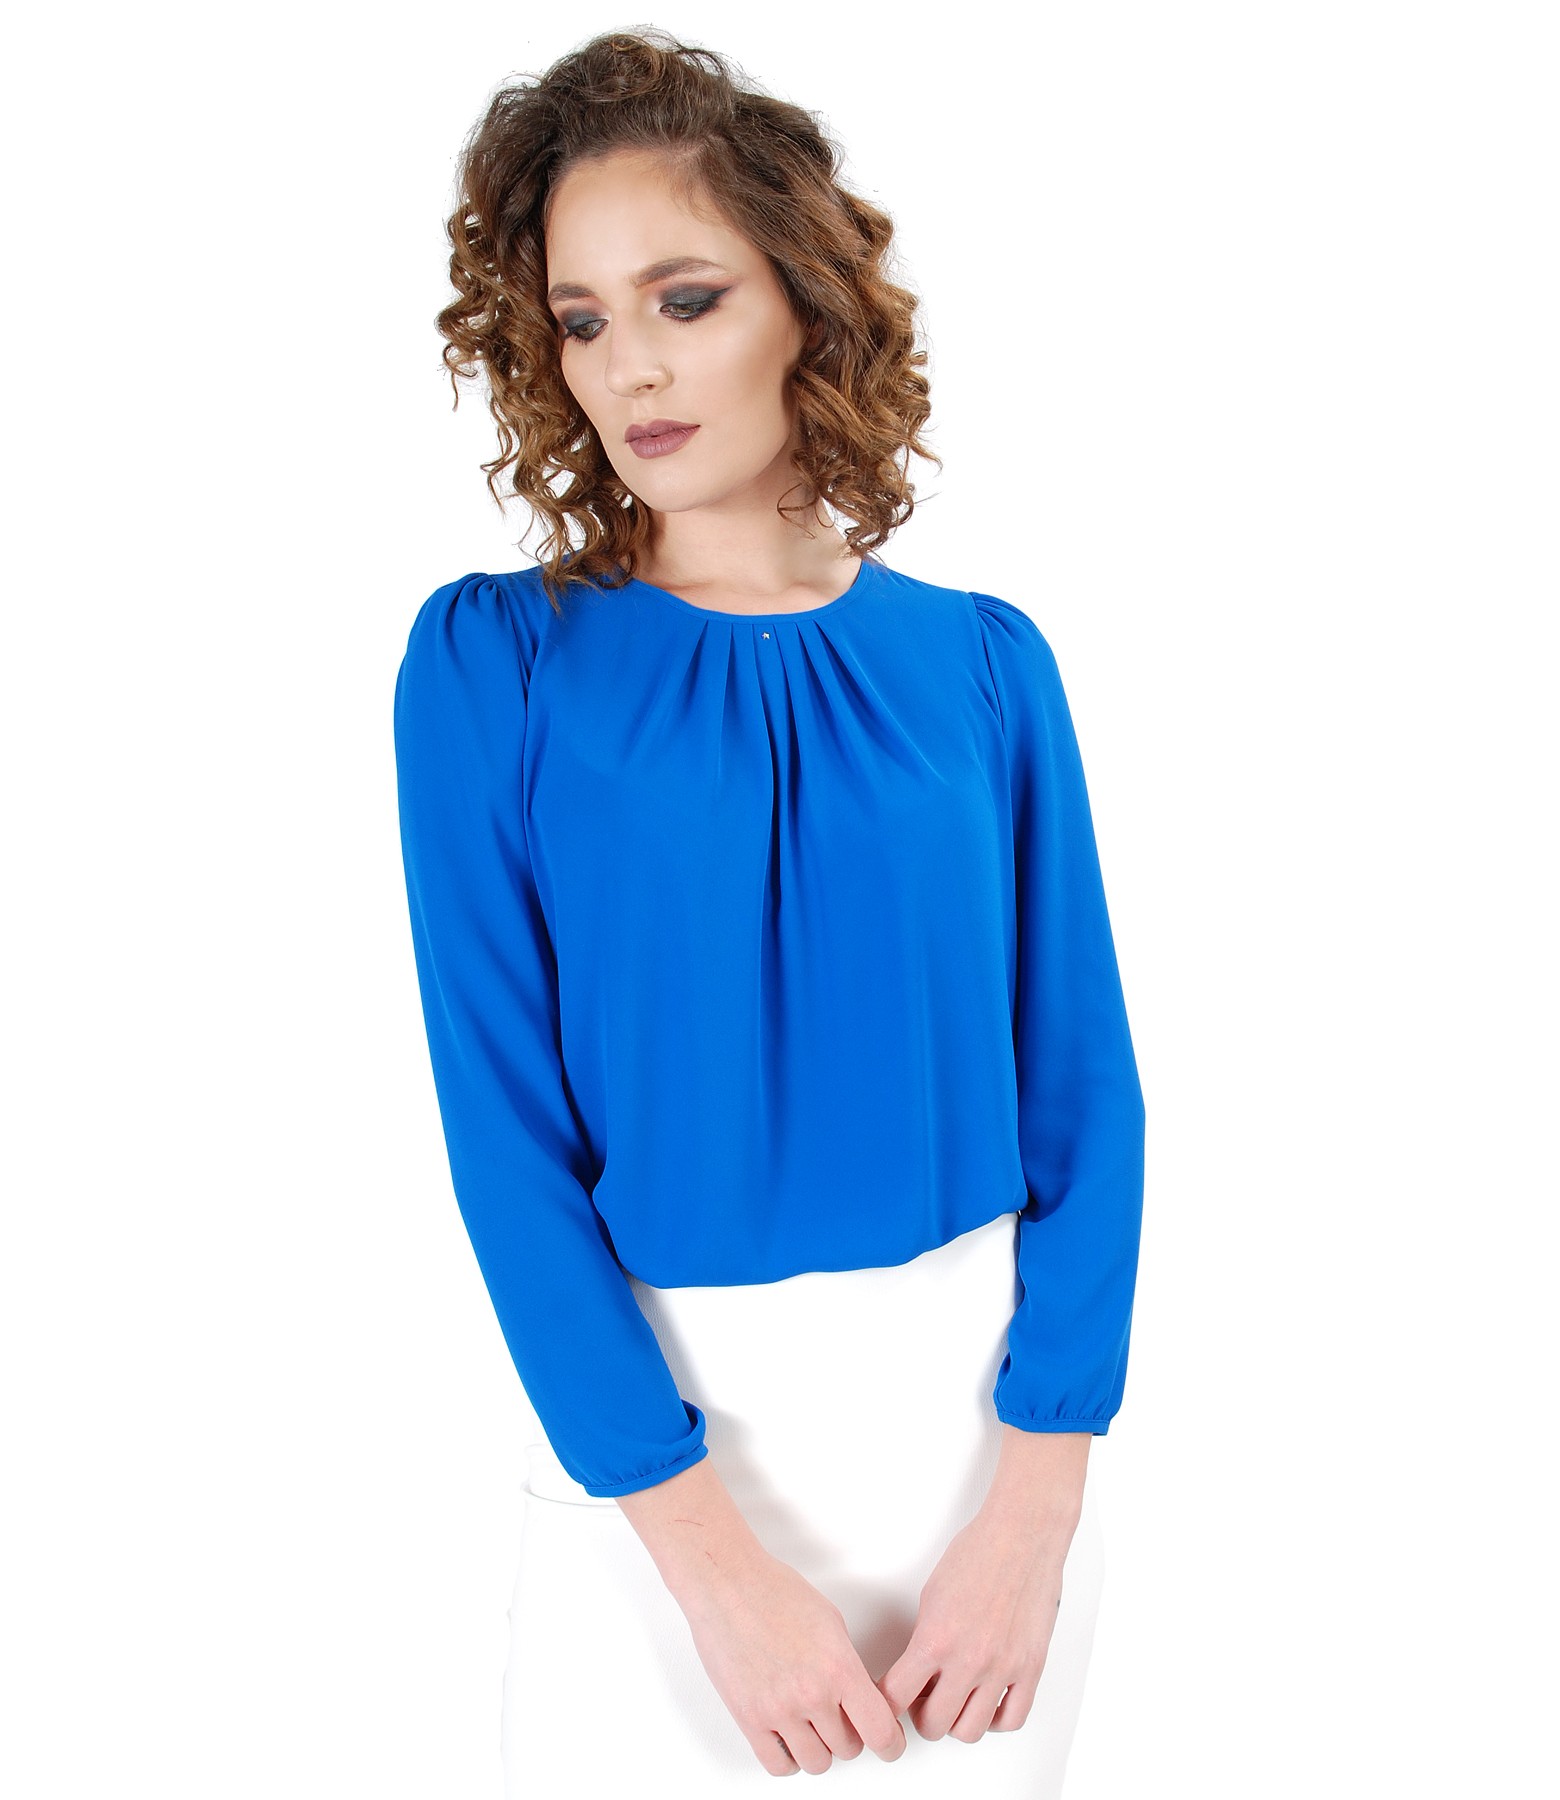 Blouse with folds on decolletage embellished with crystals safire blue ...